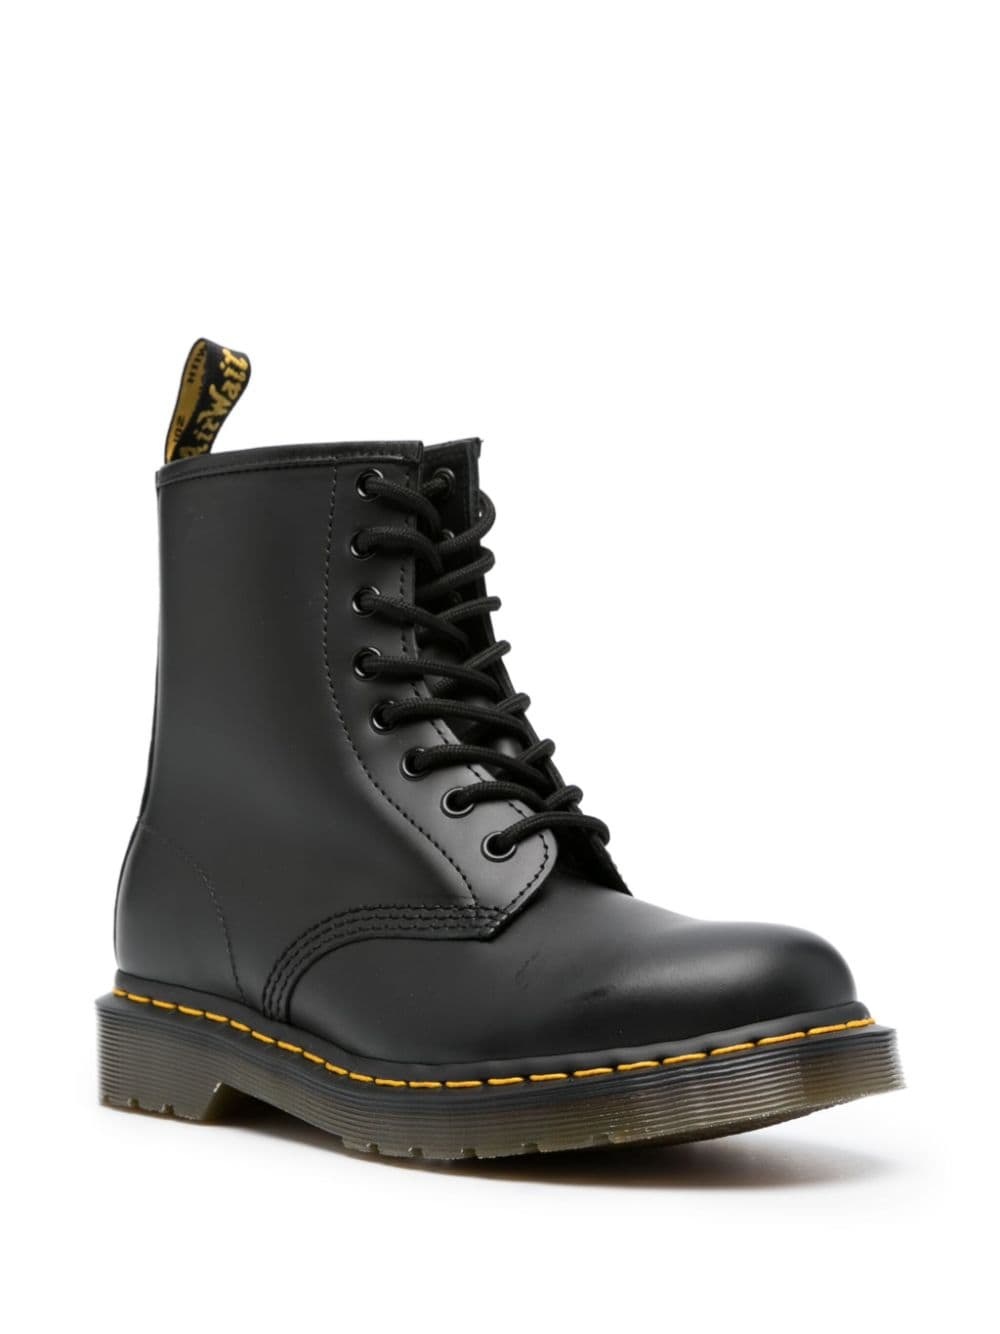 Dr. Martens 1460 leather boots | REVERSIBLE